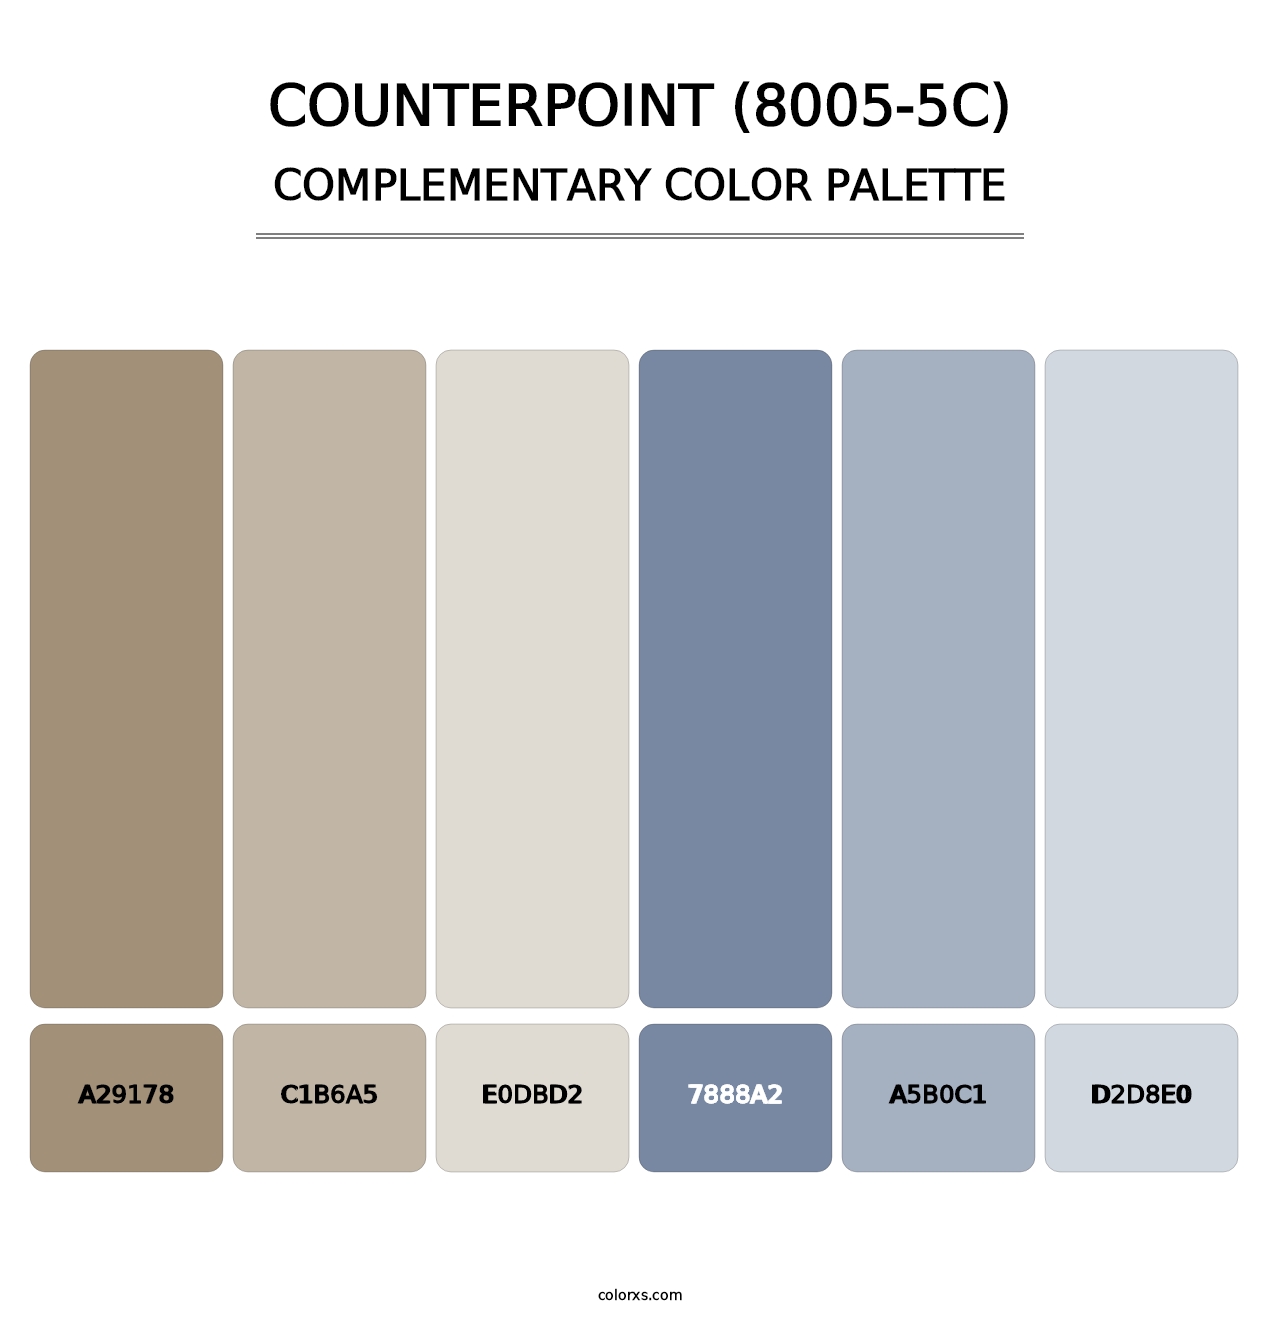 Counterpoint (8005-5C) - Complementary Color Palette